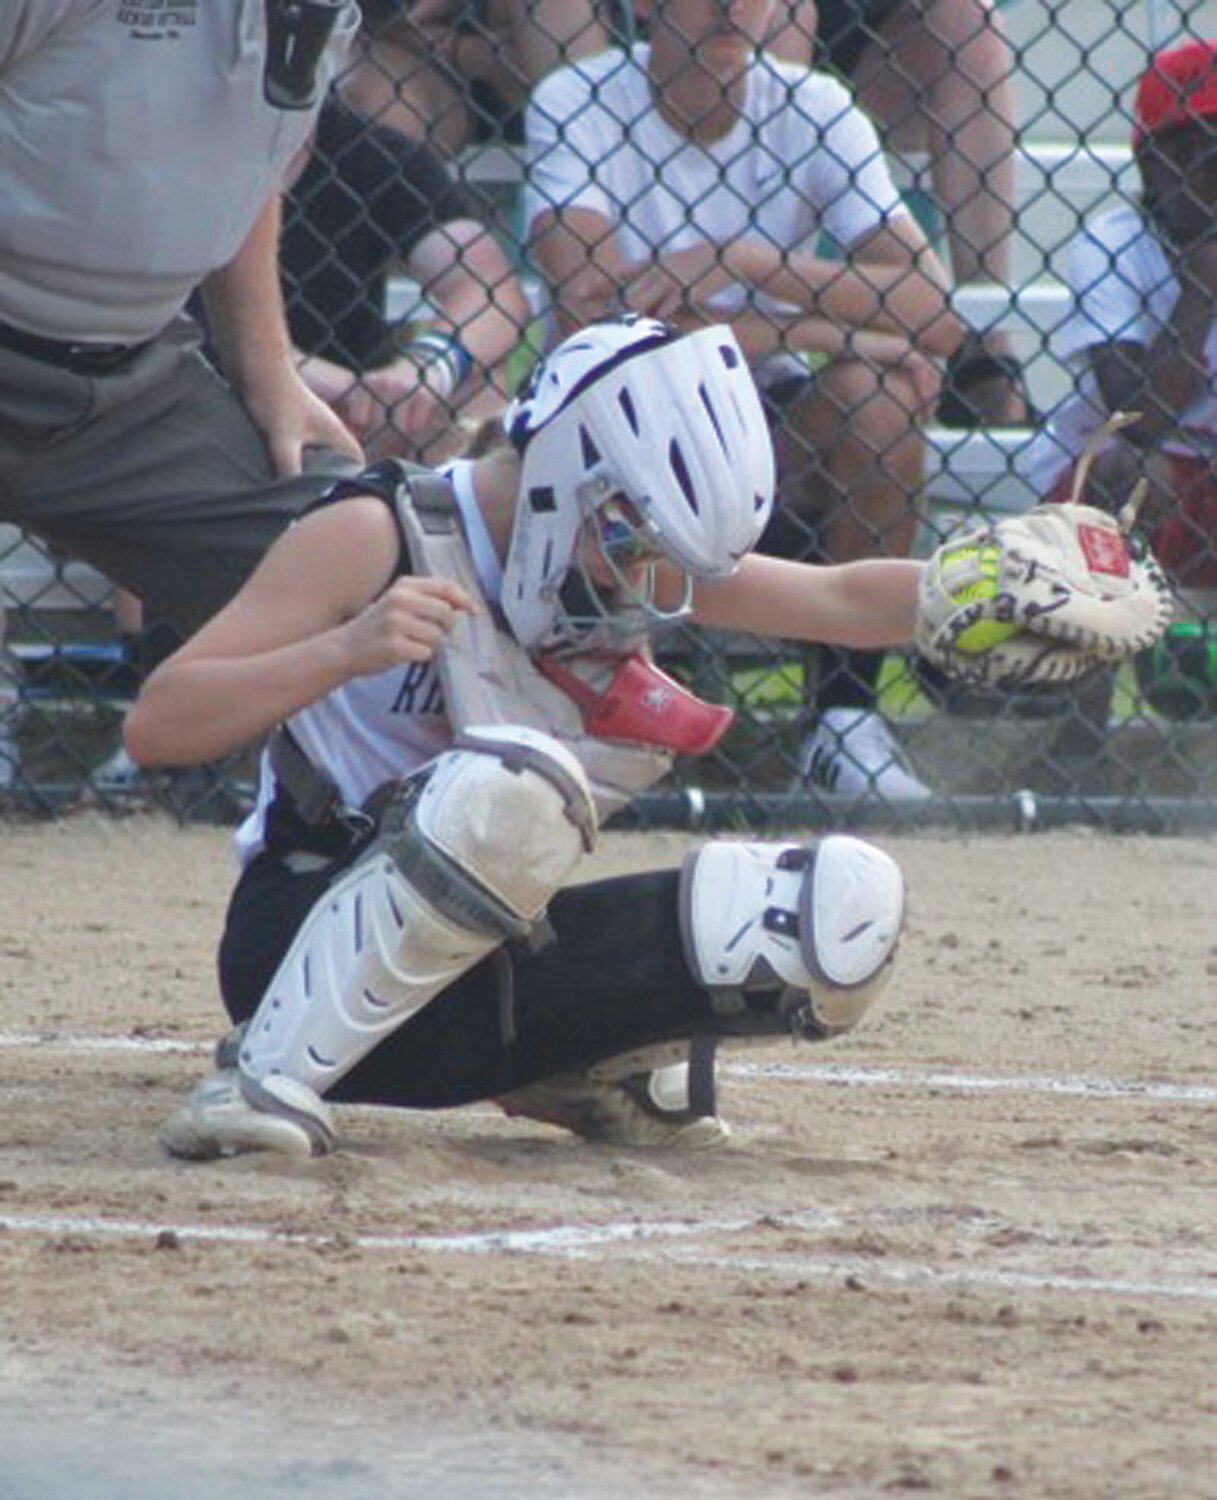 BEHIND THE PLATE: North catcher Marin Prest on Monday.